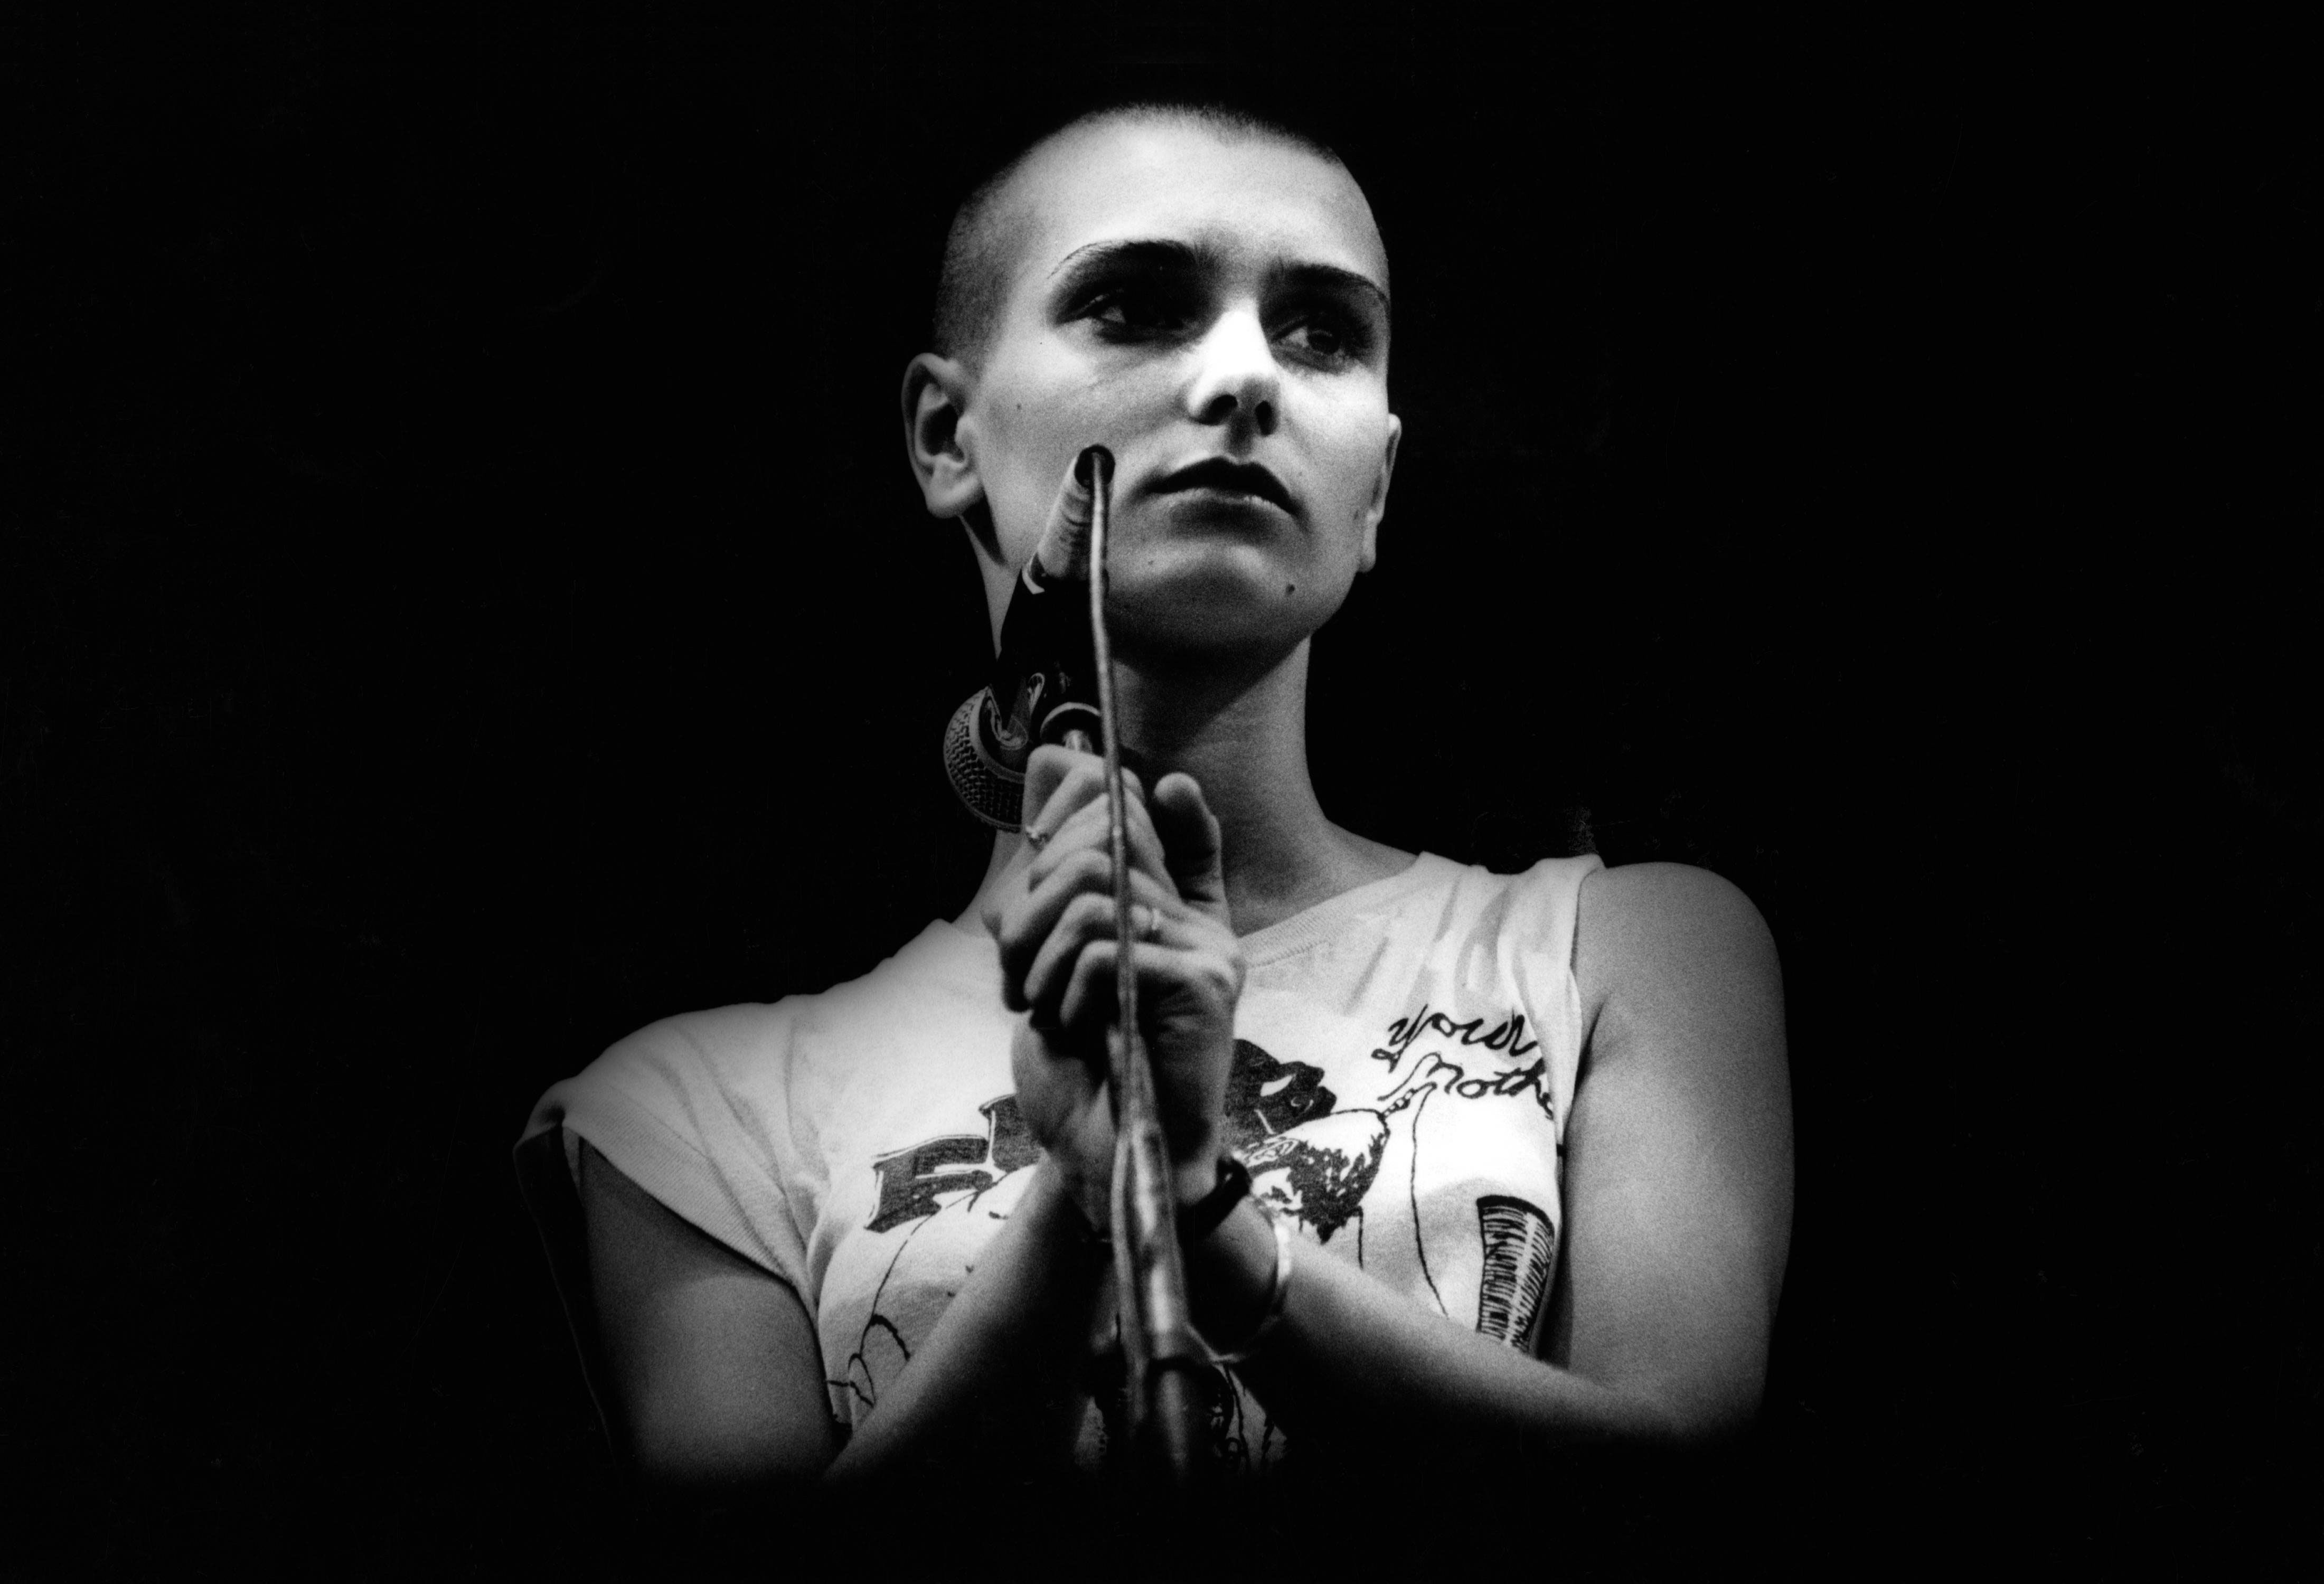 Song of the Day, March 10: Sacrifice by Sinéad O'Connor